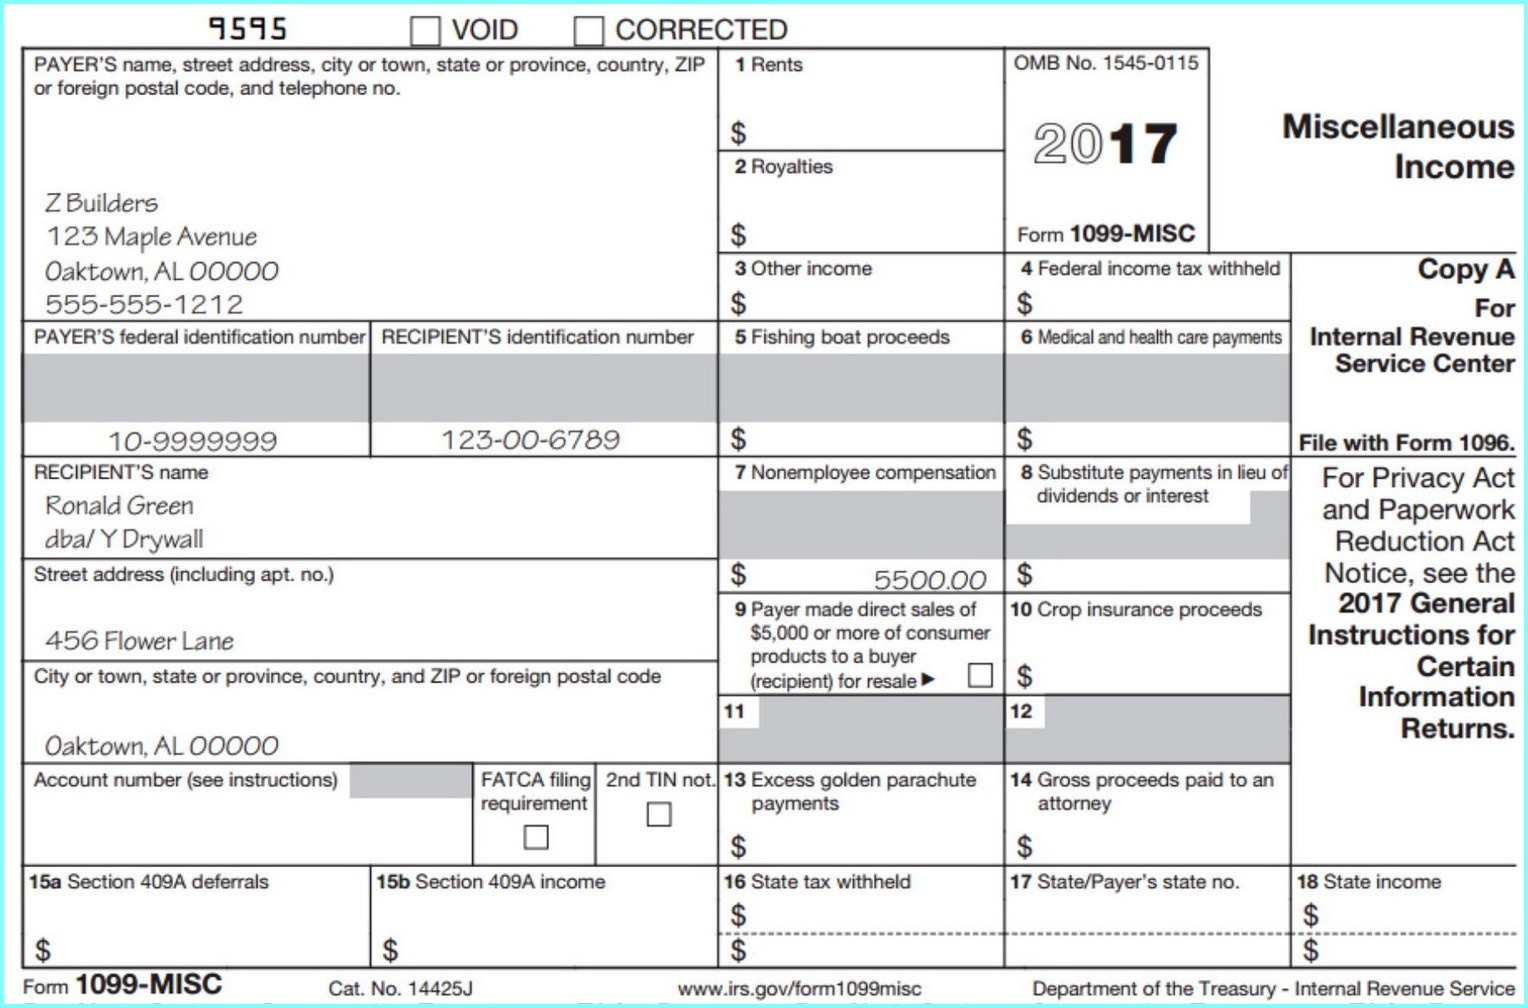 Printable 1099 Form 2017 Misc - Form : Resume Examples #djqlelg4Kw - Free Printable 1099 Form 2016